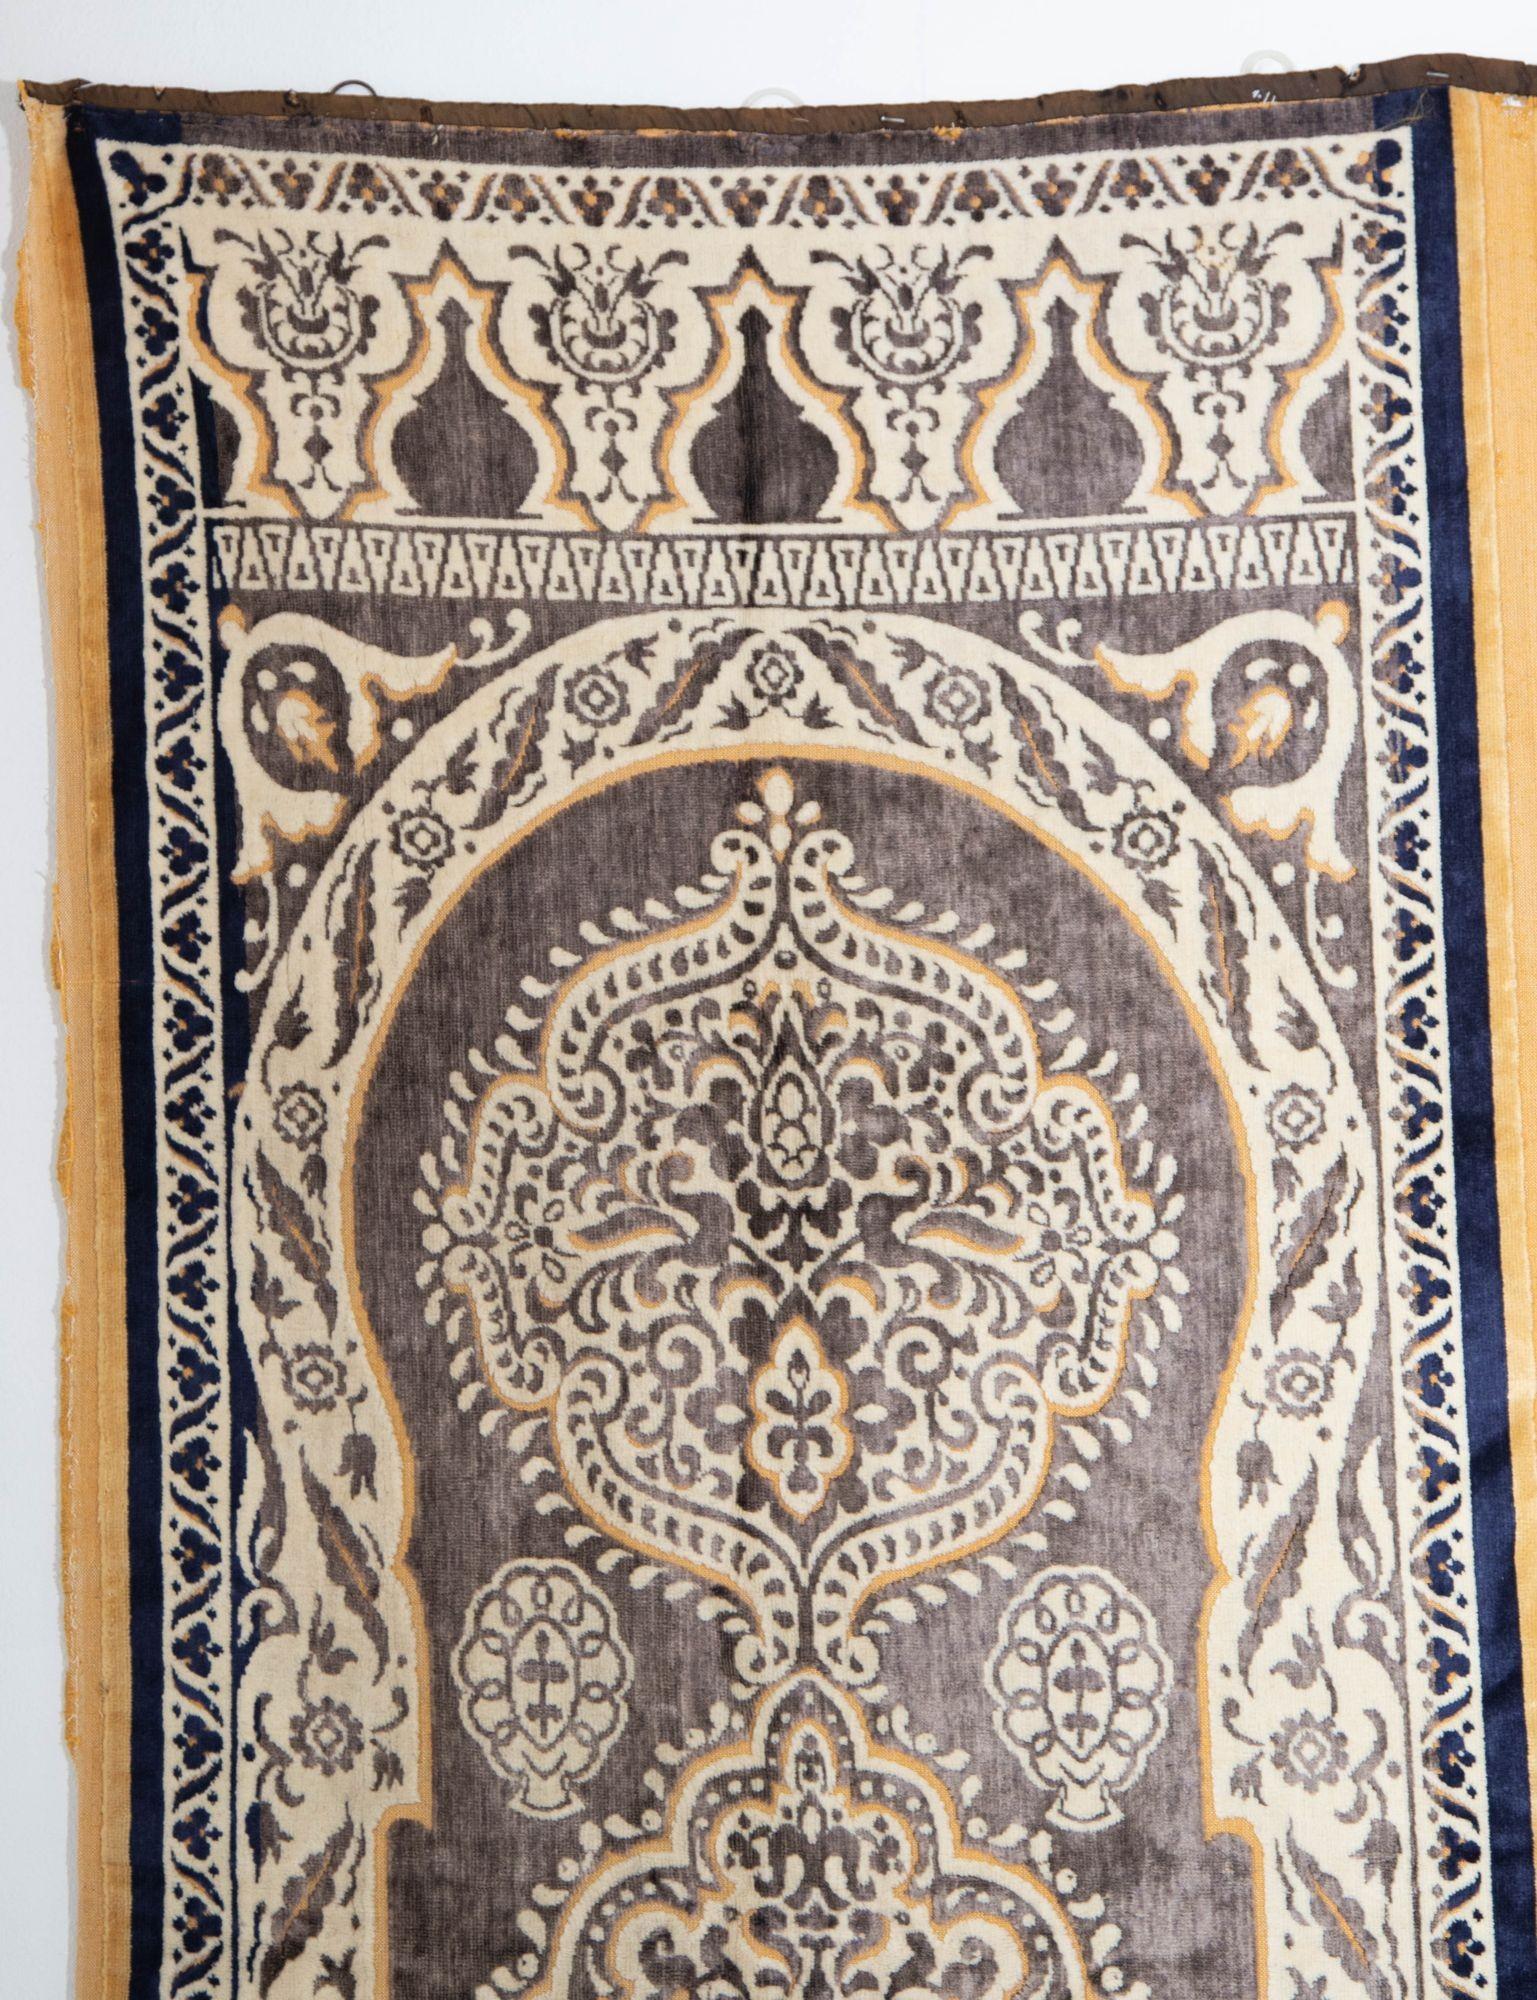 Antique Moroccan Moorish Silk Textile Tapestry Wall Hanging Hiti 19th C. For Sale 10